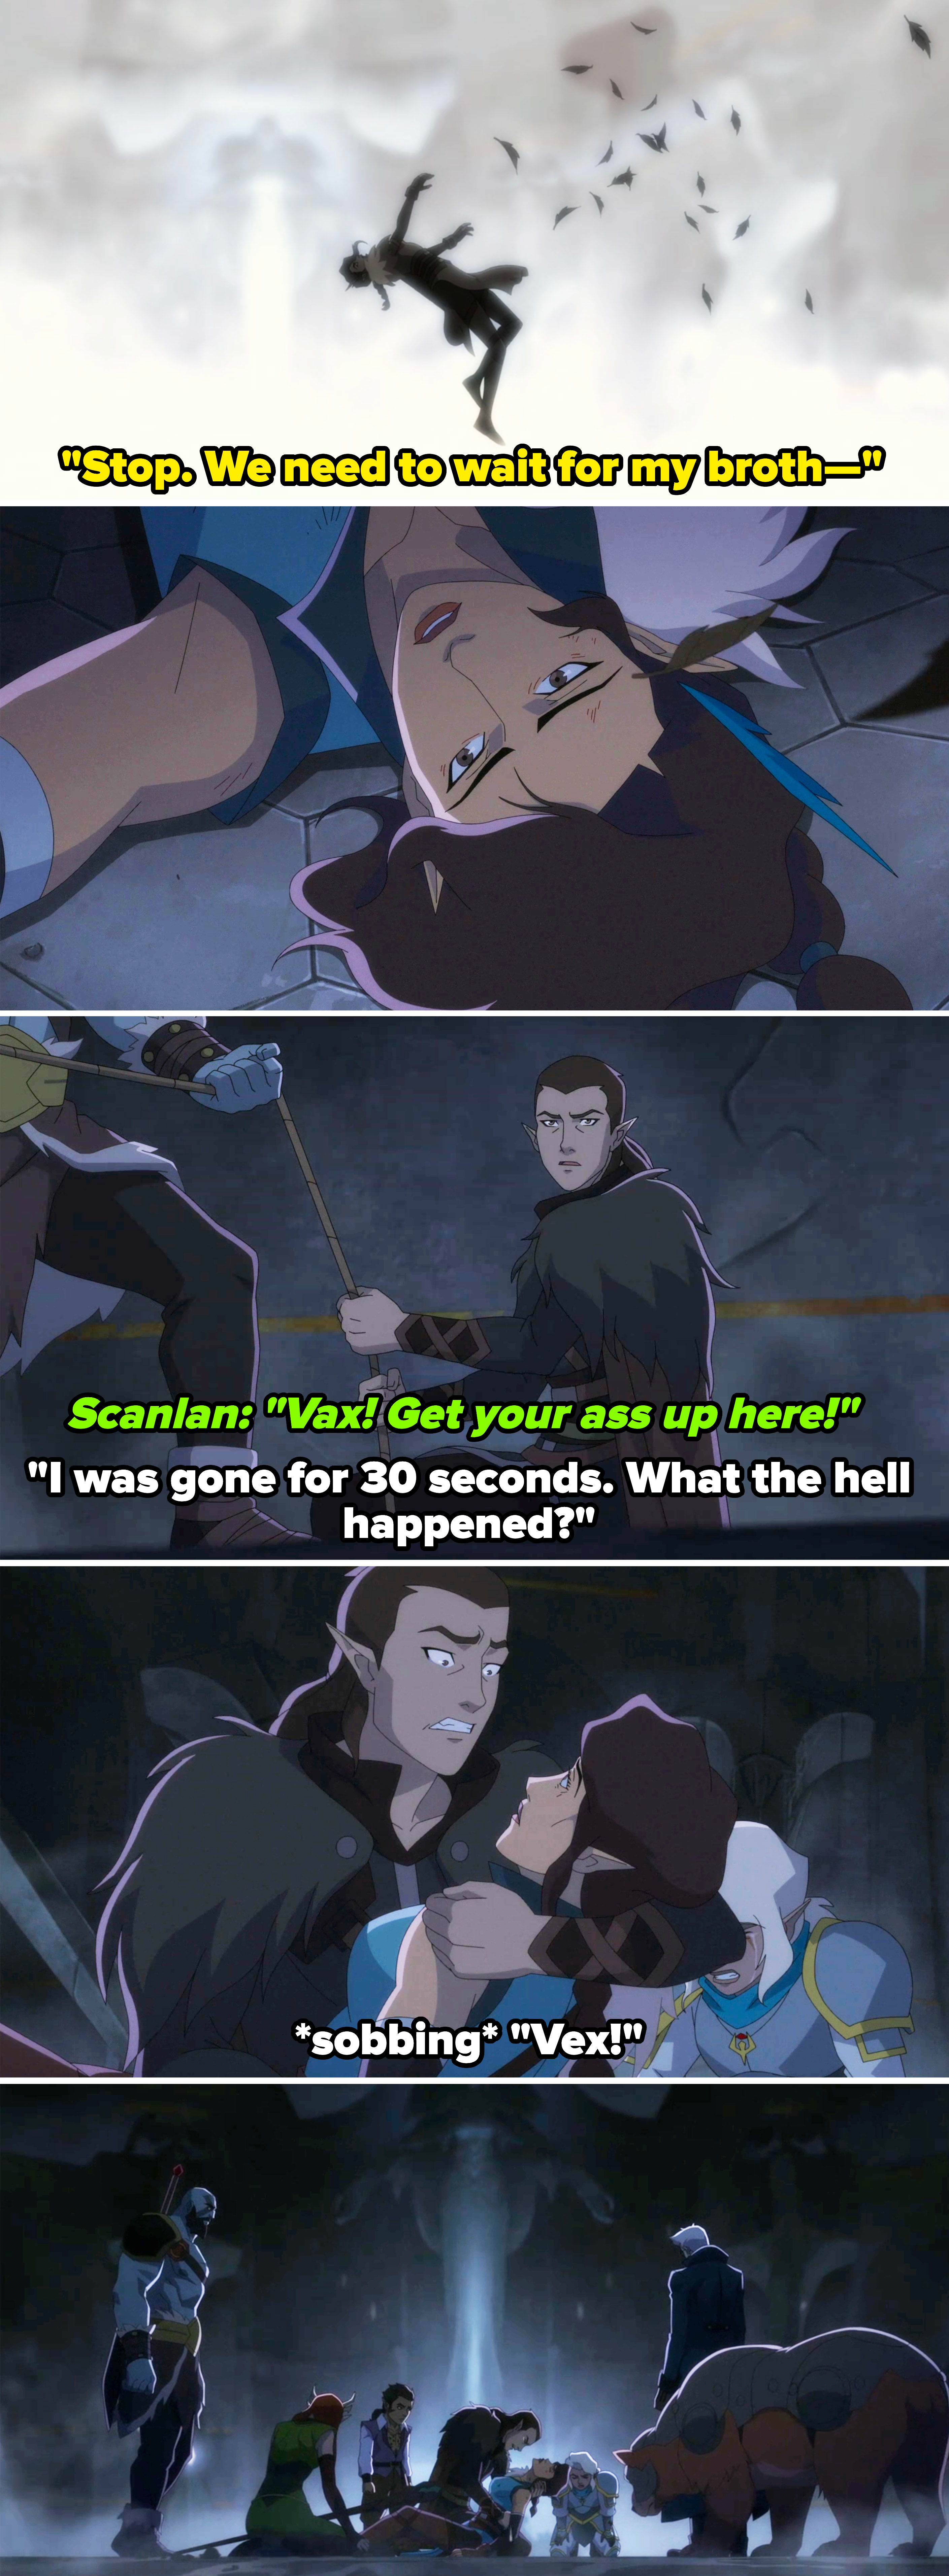 Scanlan telling Vax to &quot;Get your ass up here!&quot; and Vax saying &quot;I was gone for 30 seconds, what the hell happened?&quot; and then sobbing over Vex